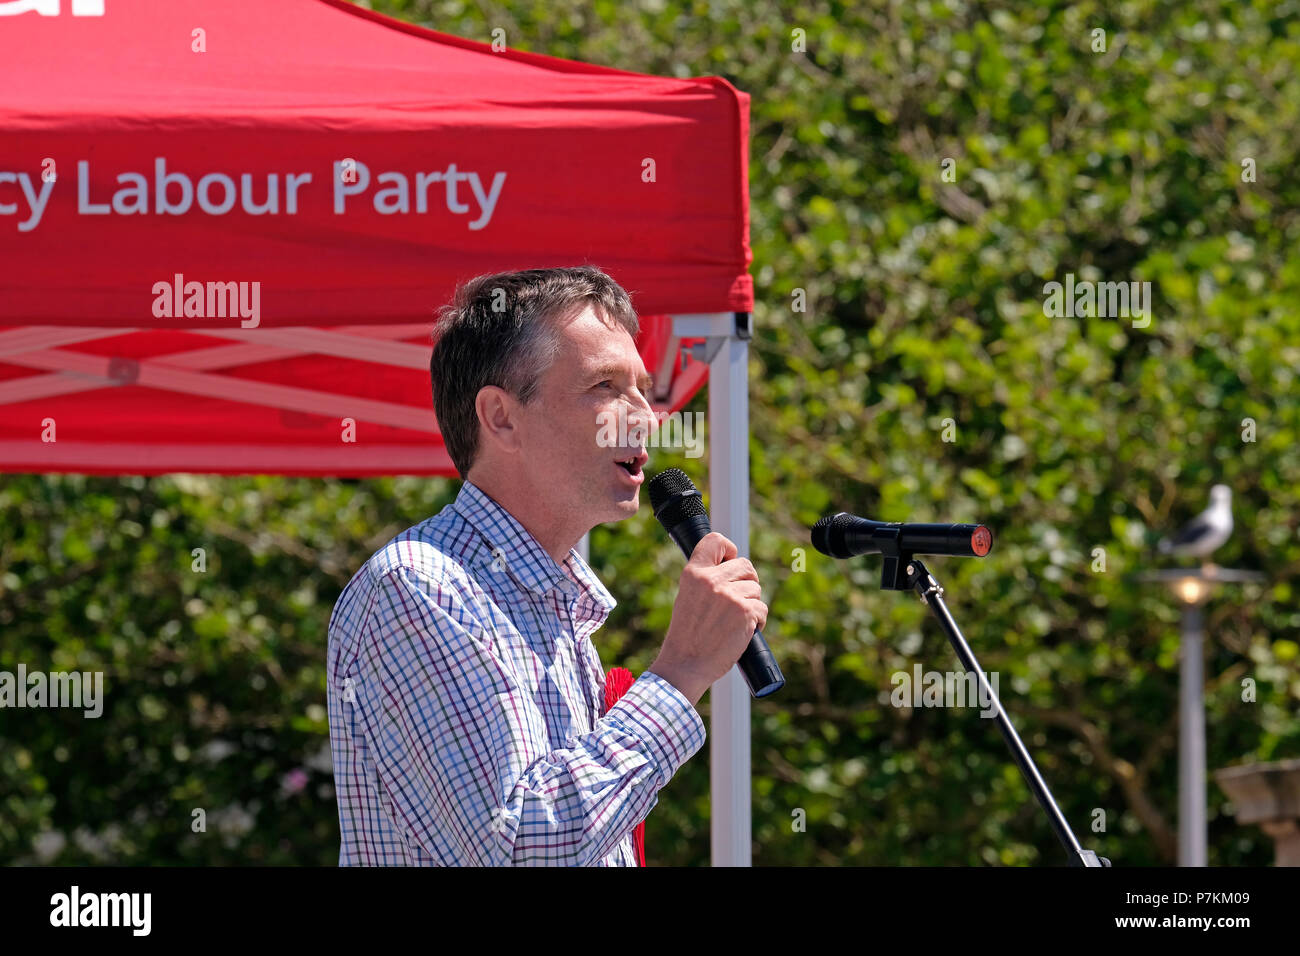 Weston-super-Mare, UK. 7th July, 2018. Tim Taylor of Weston Constituency Labour Party, speaks at a demonstration against the overnight closure of the accident and emergency department at Weston General Hospital. Despite assurances that the closure is only a temporary measure, it has been in effect since July 2017, and many people in the area are concerned that it is the prelude to further cuts. Keith Ramsey/Alamy Live News Stock Photo